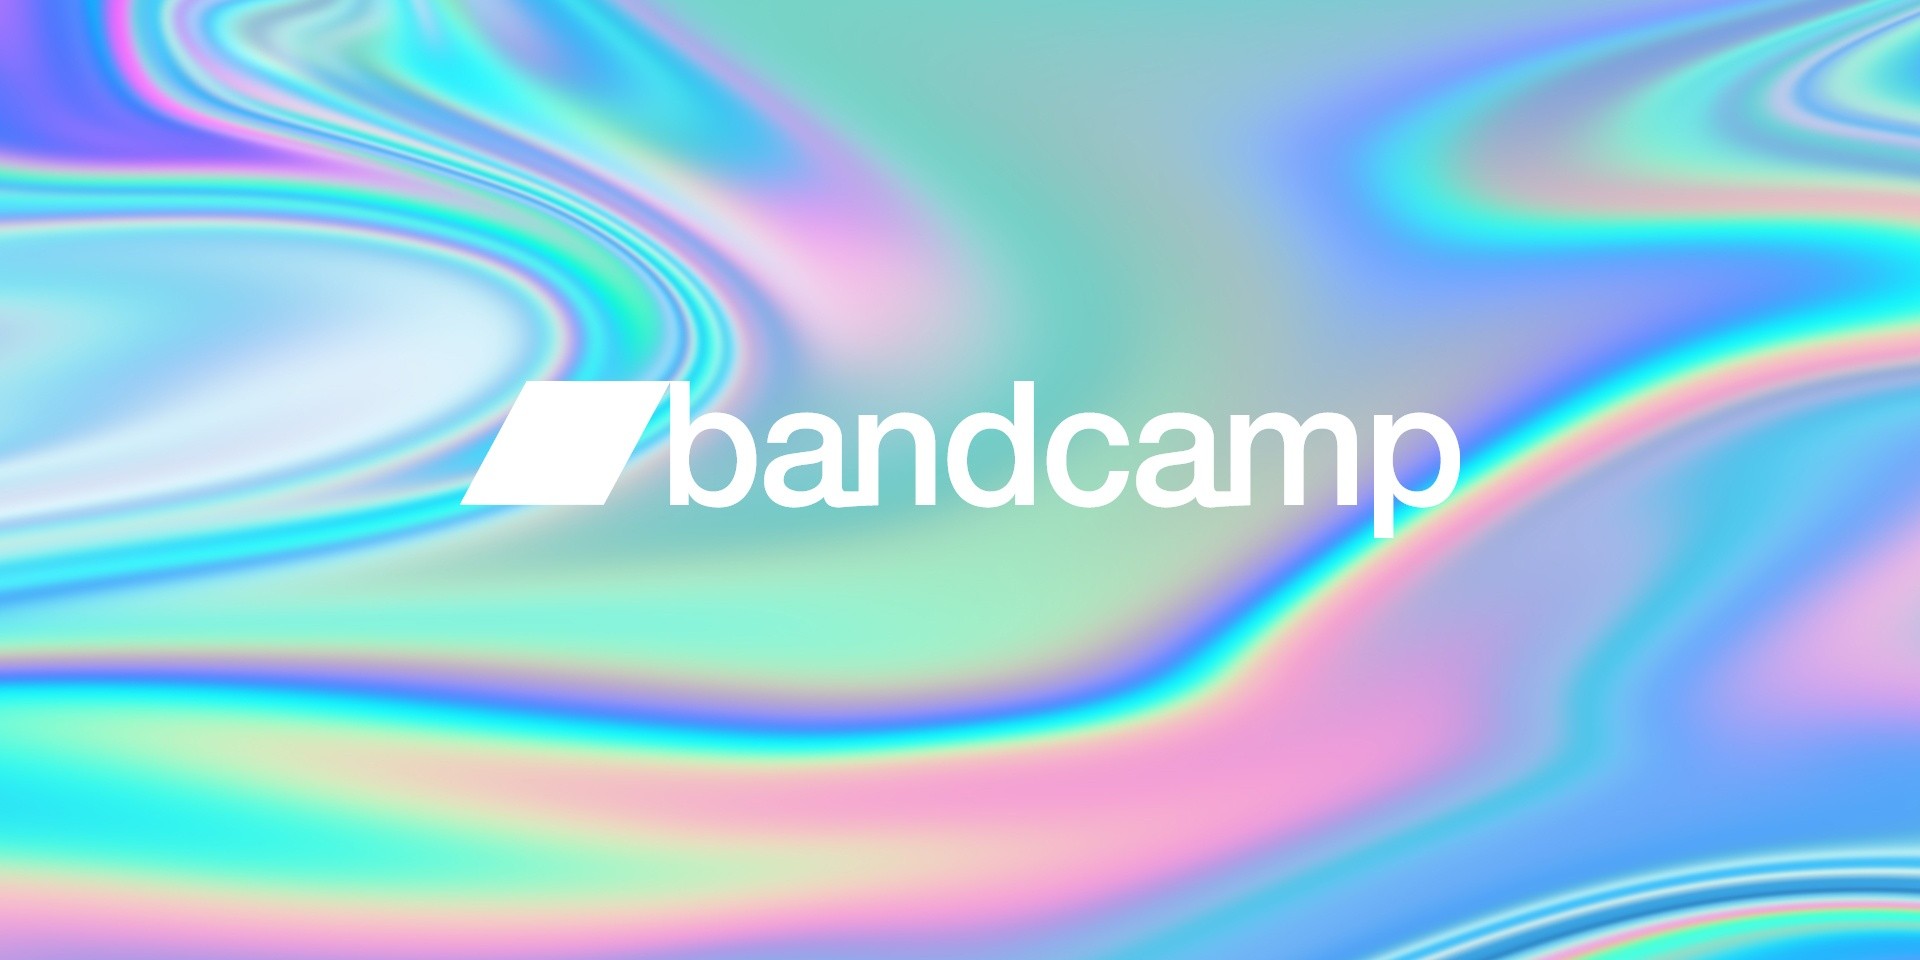 Bandcamp to waive revenue shares for 24 hours on Labor Day